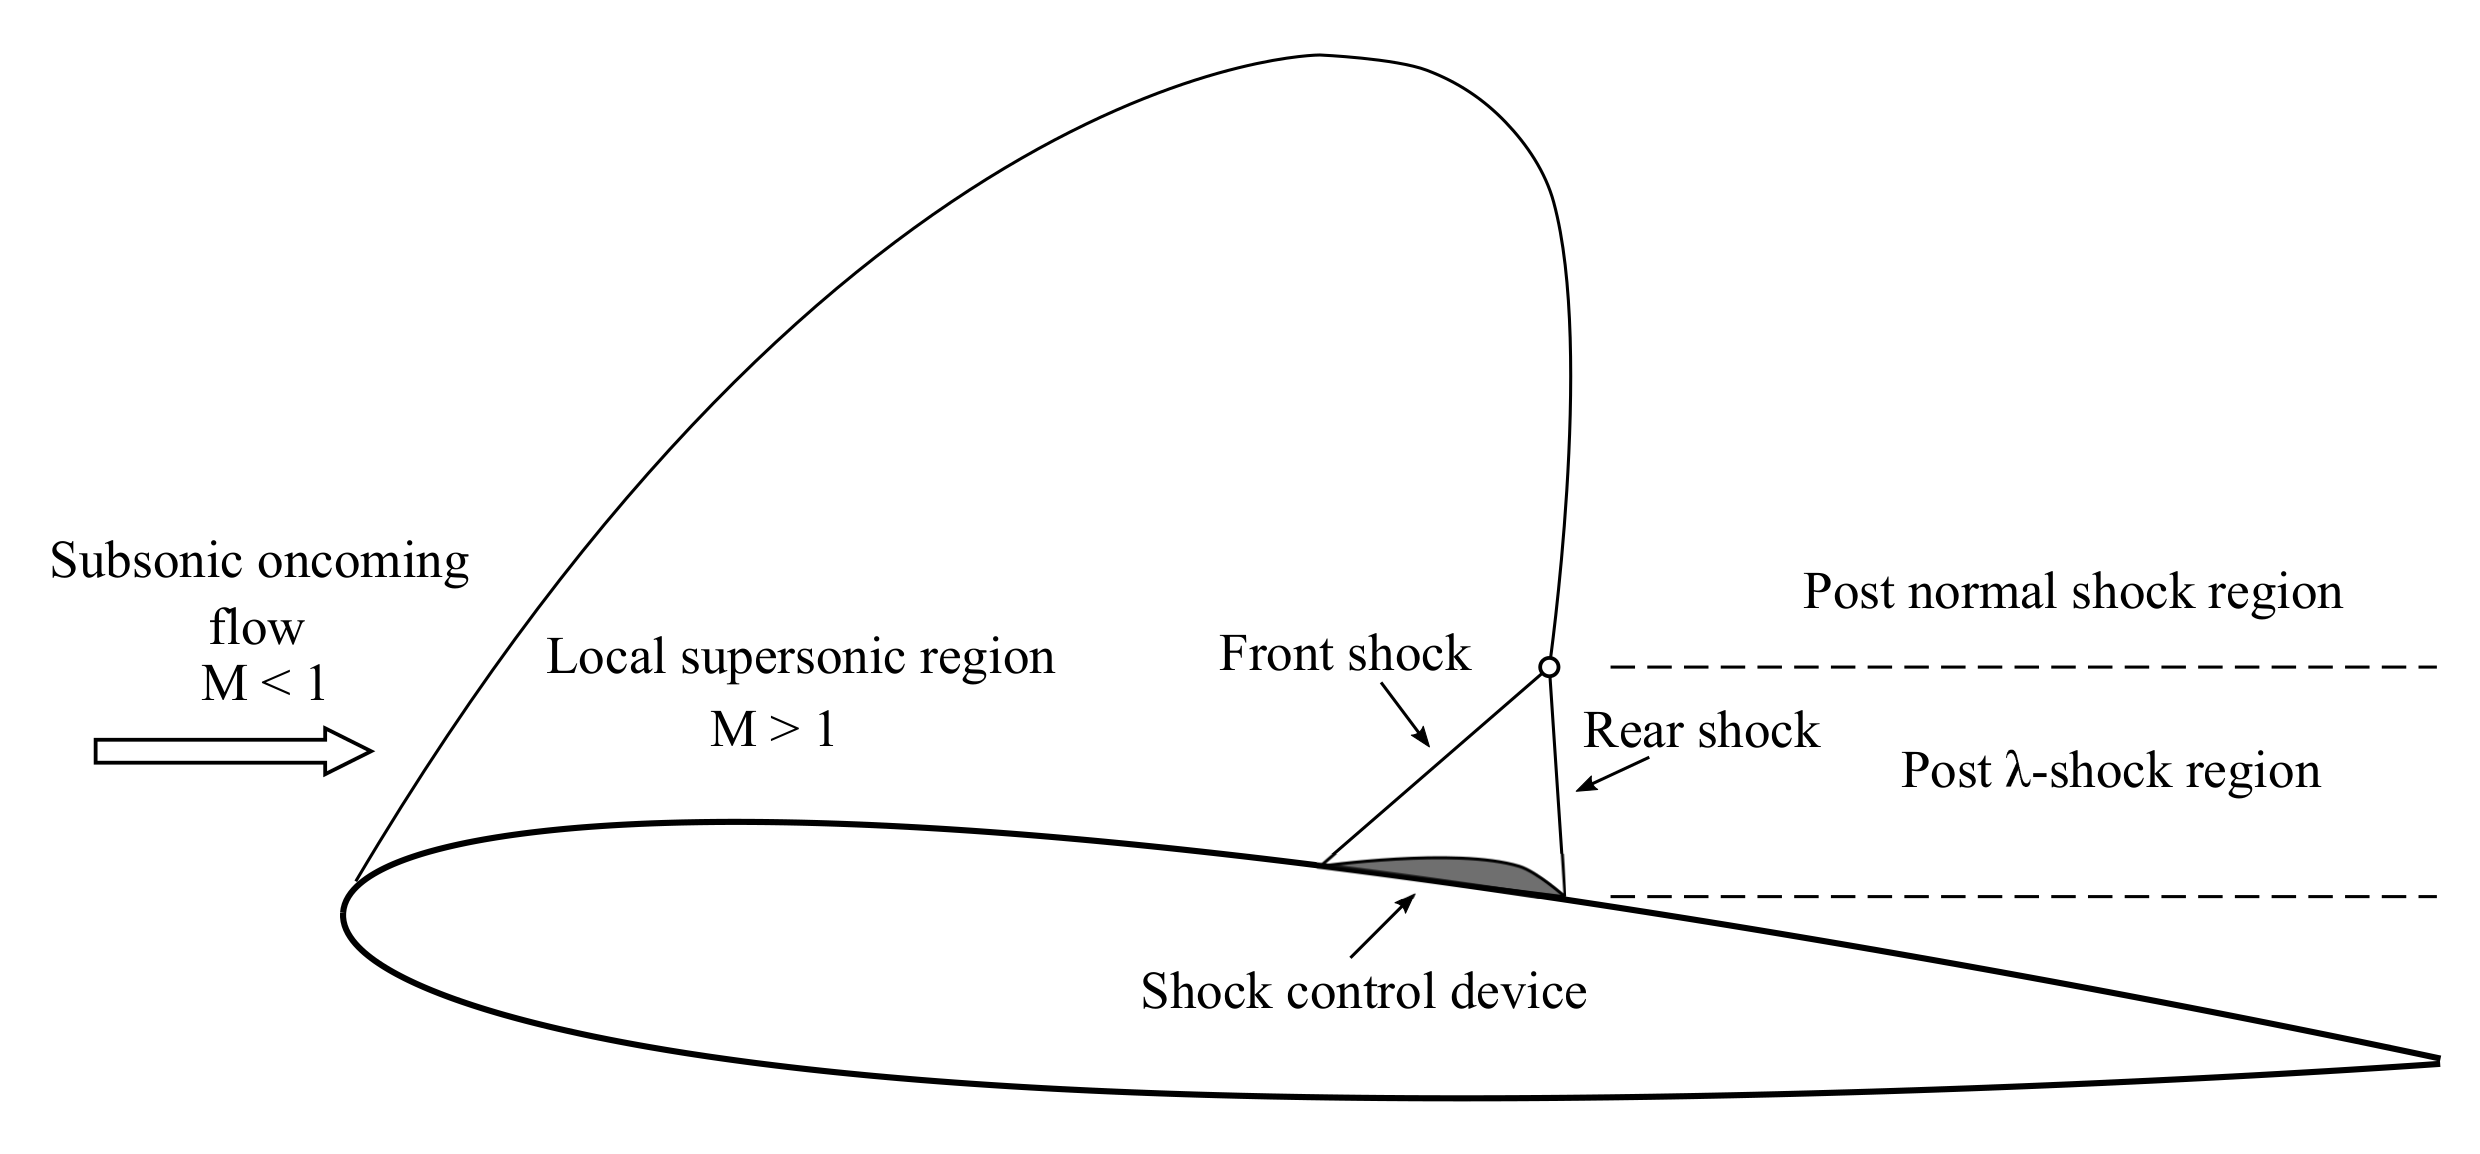 Mach number distribution for subsonic flow over a bump.